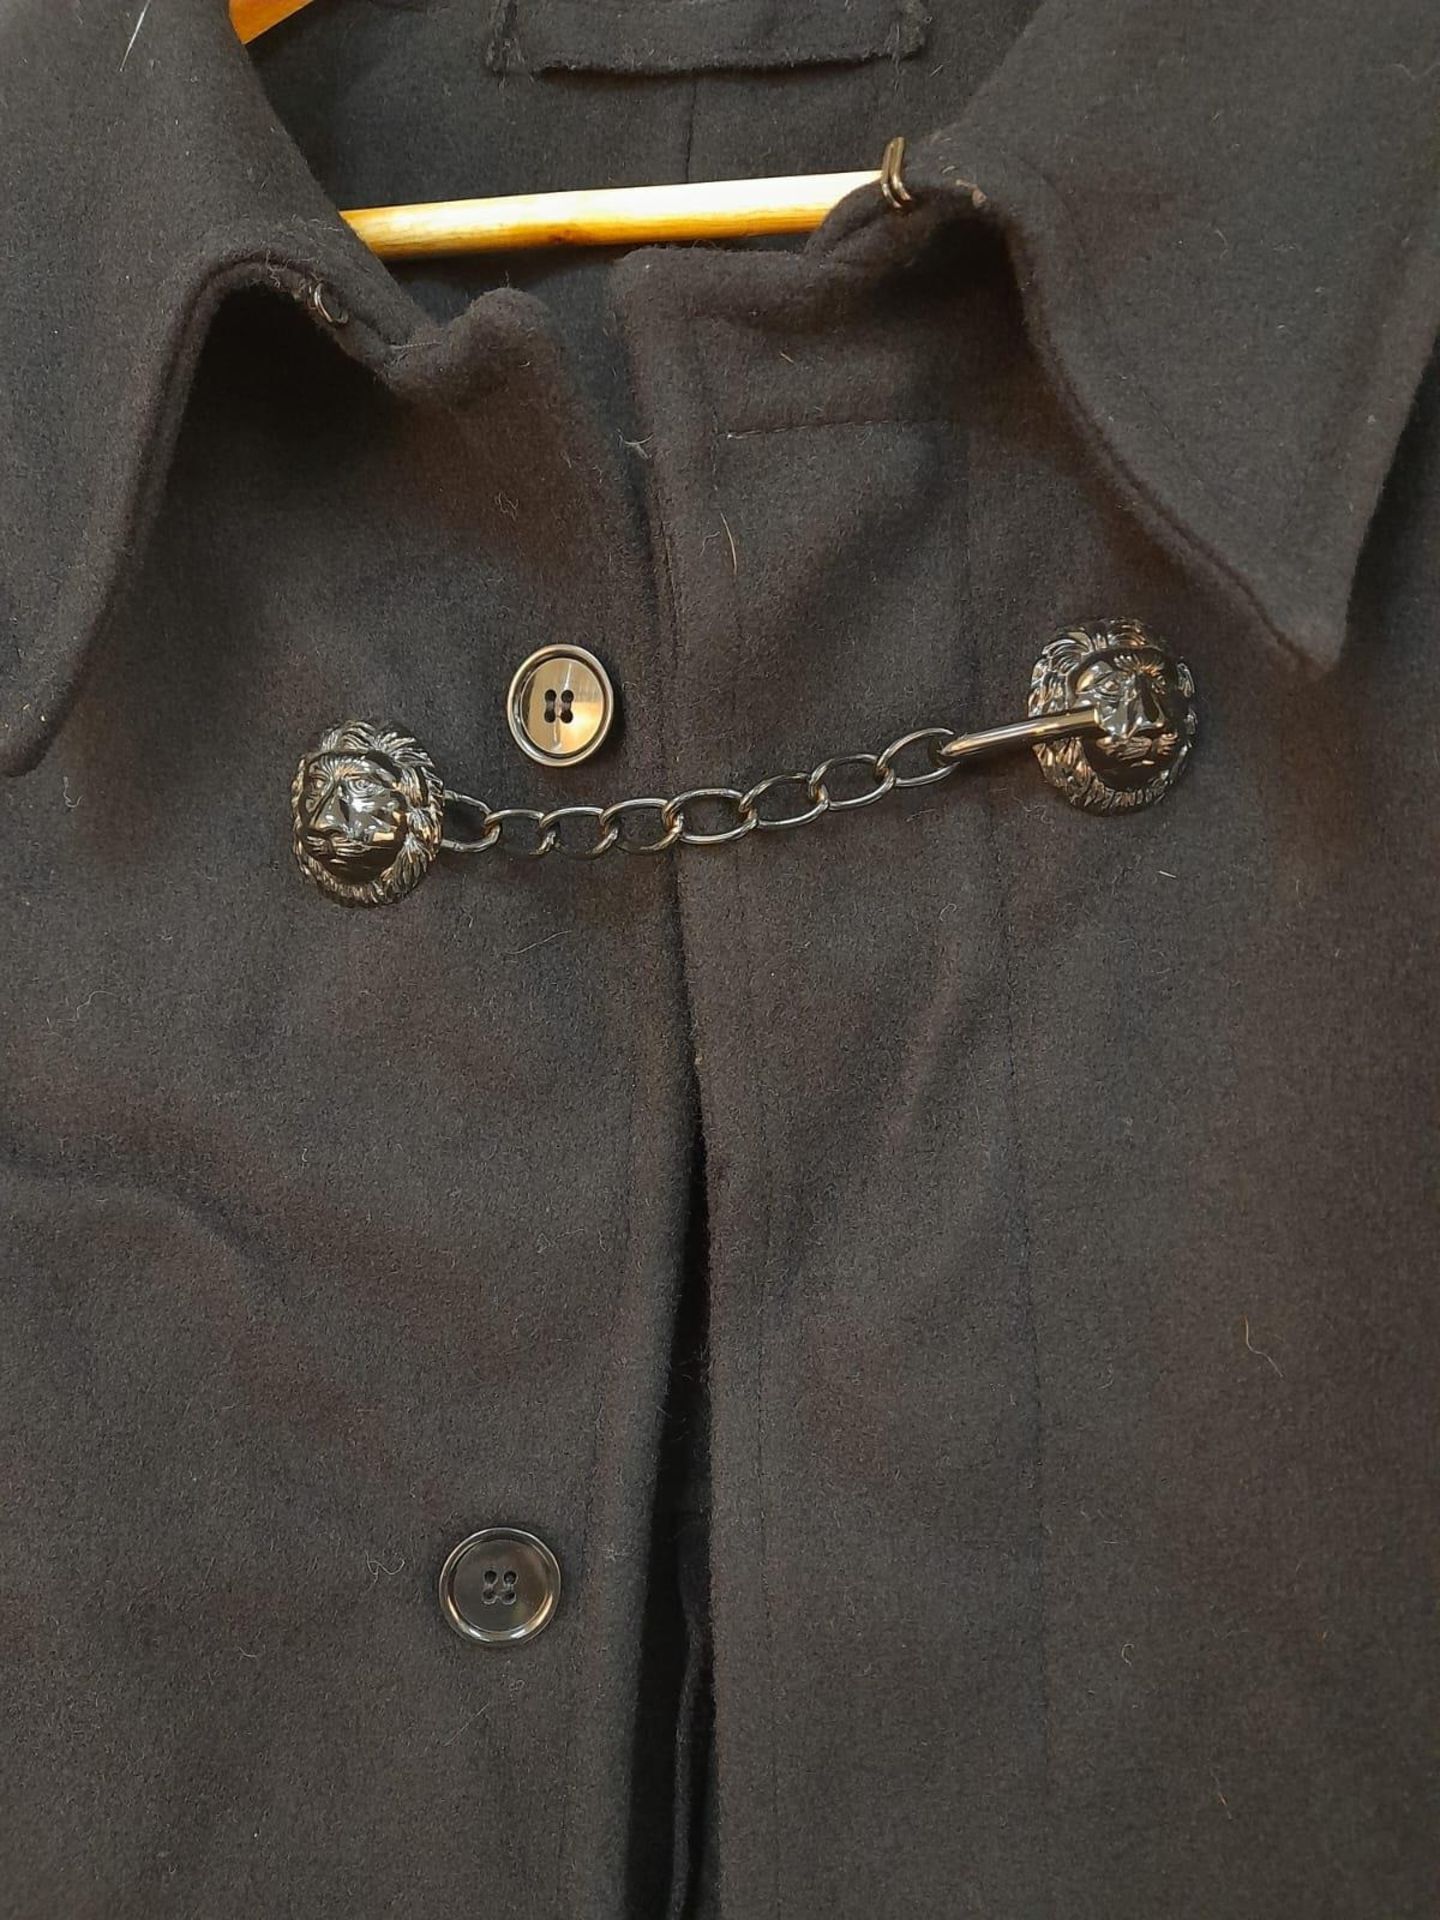 An Antique Victorian Police Officers (Sergeant) High Collar Tunic - With matching vintage trousers - Image 8 of 11